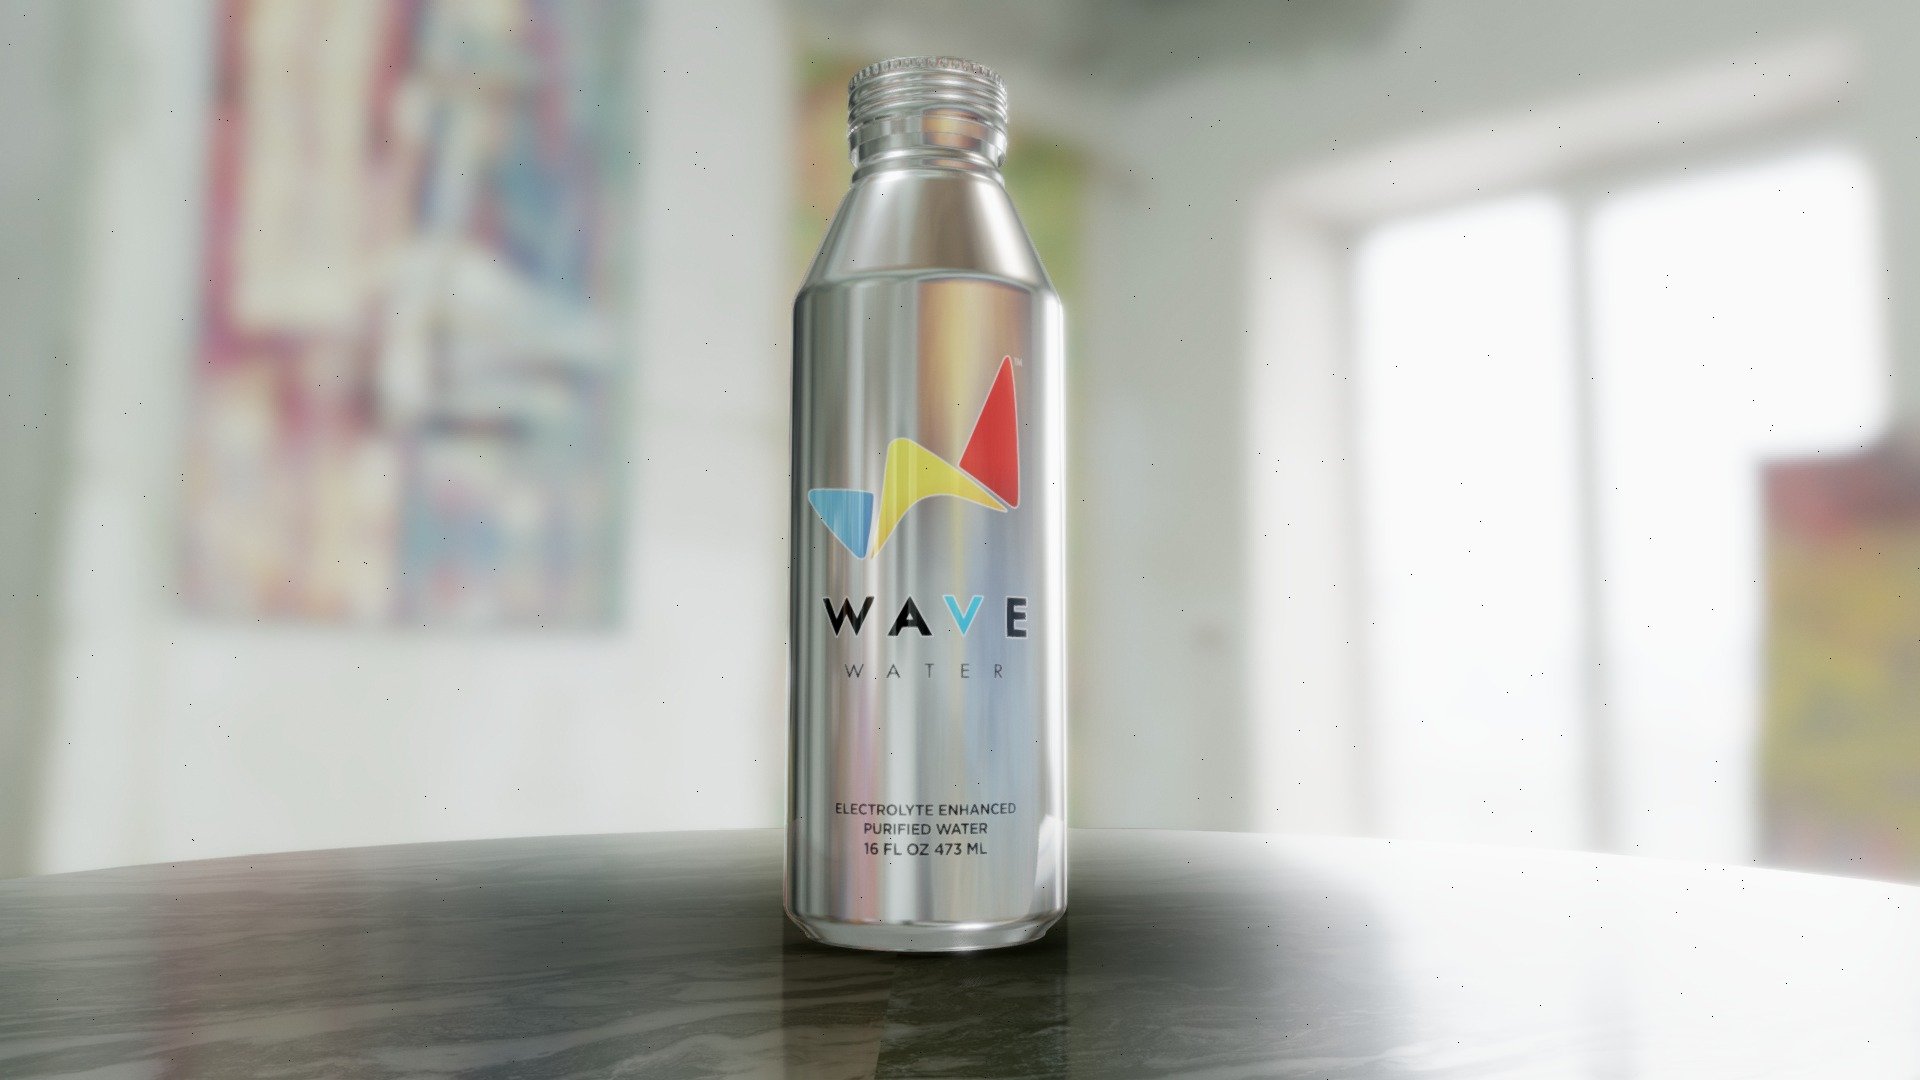 Refillable Aluminum Water Bottle with Purified Water